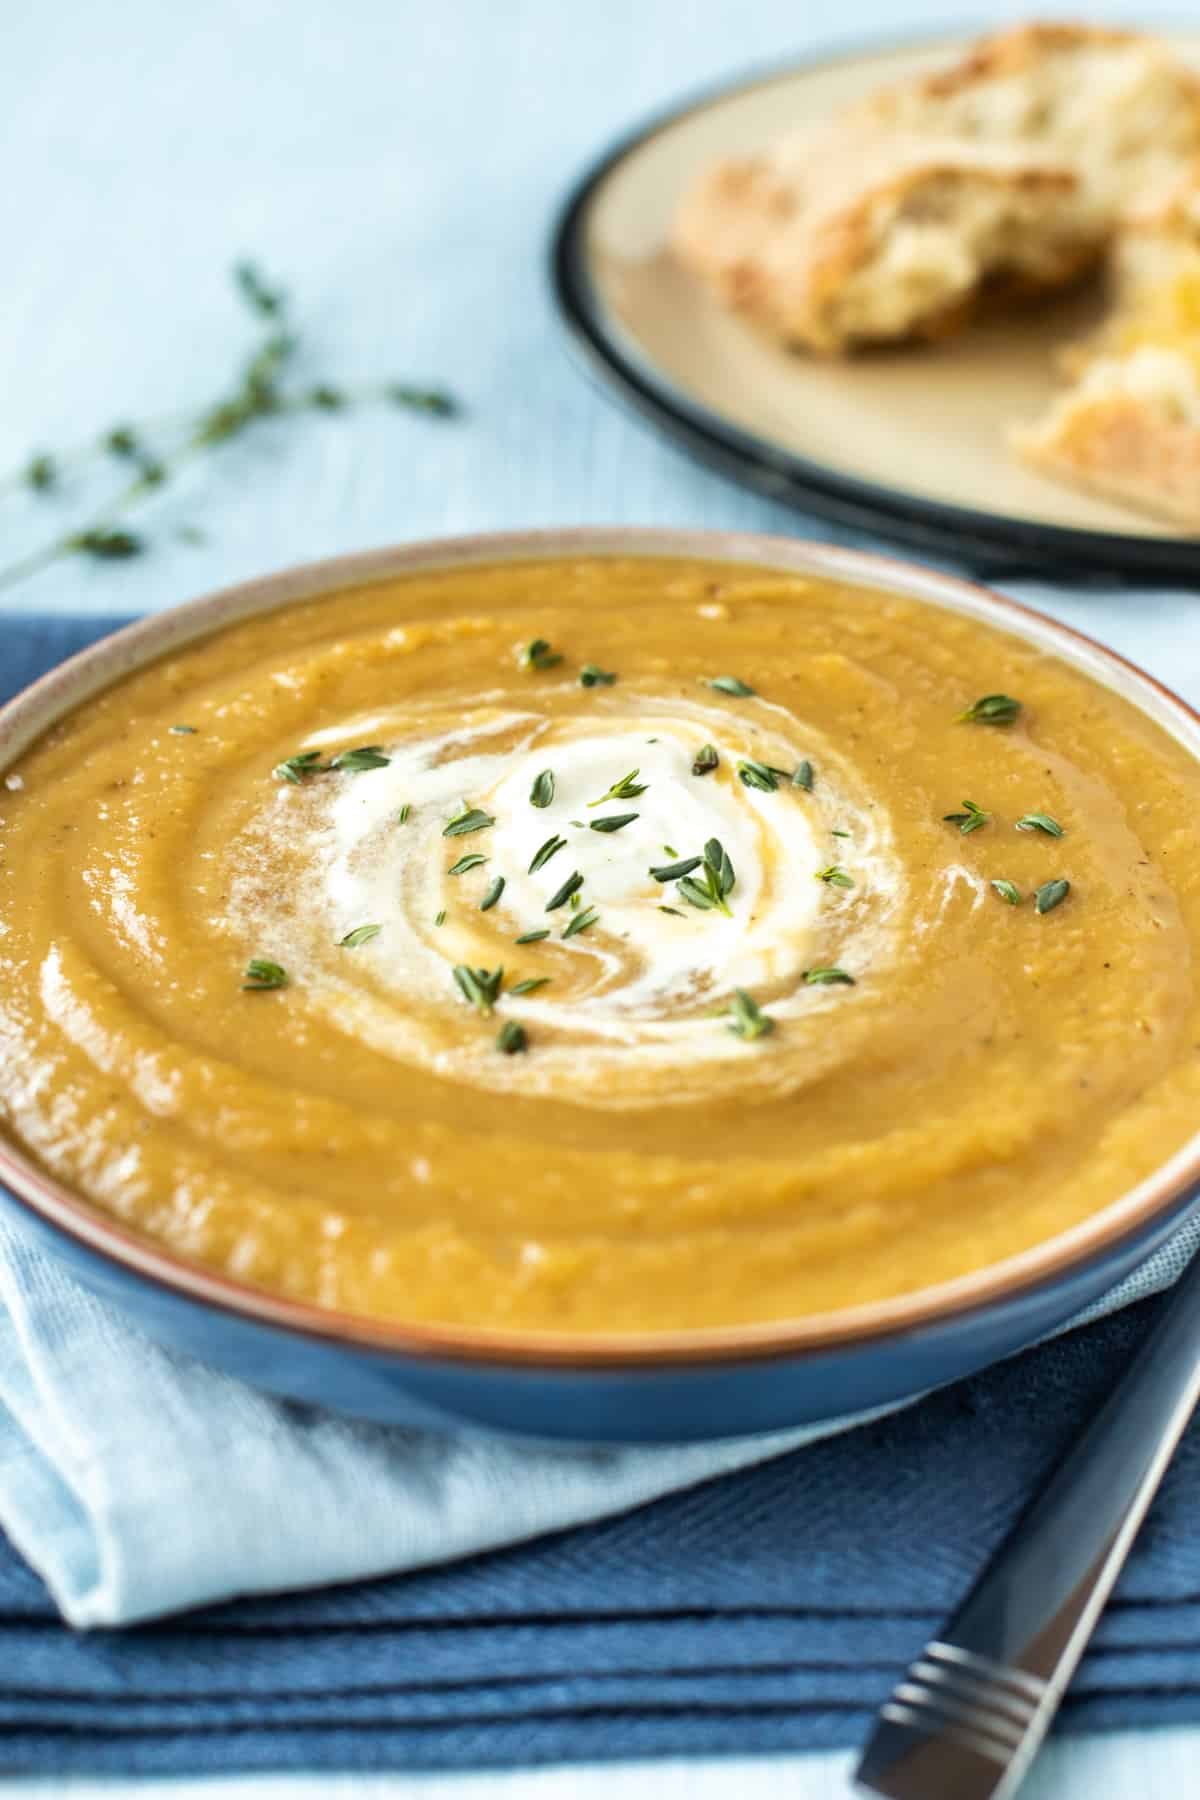 A bowl of roasted parsnip soup topped with a swirl of cream and fresh thyme leaves.